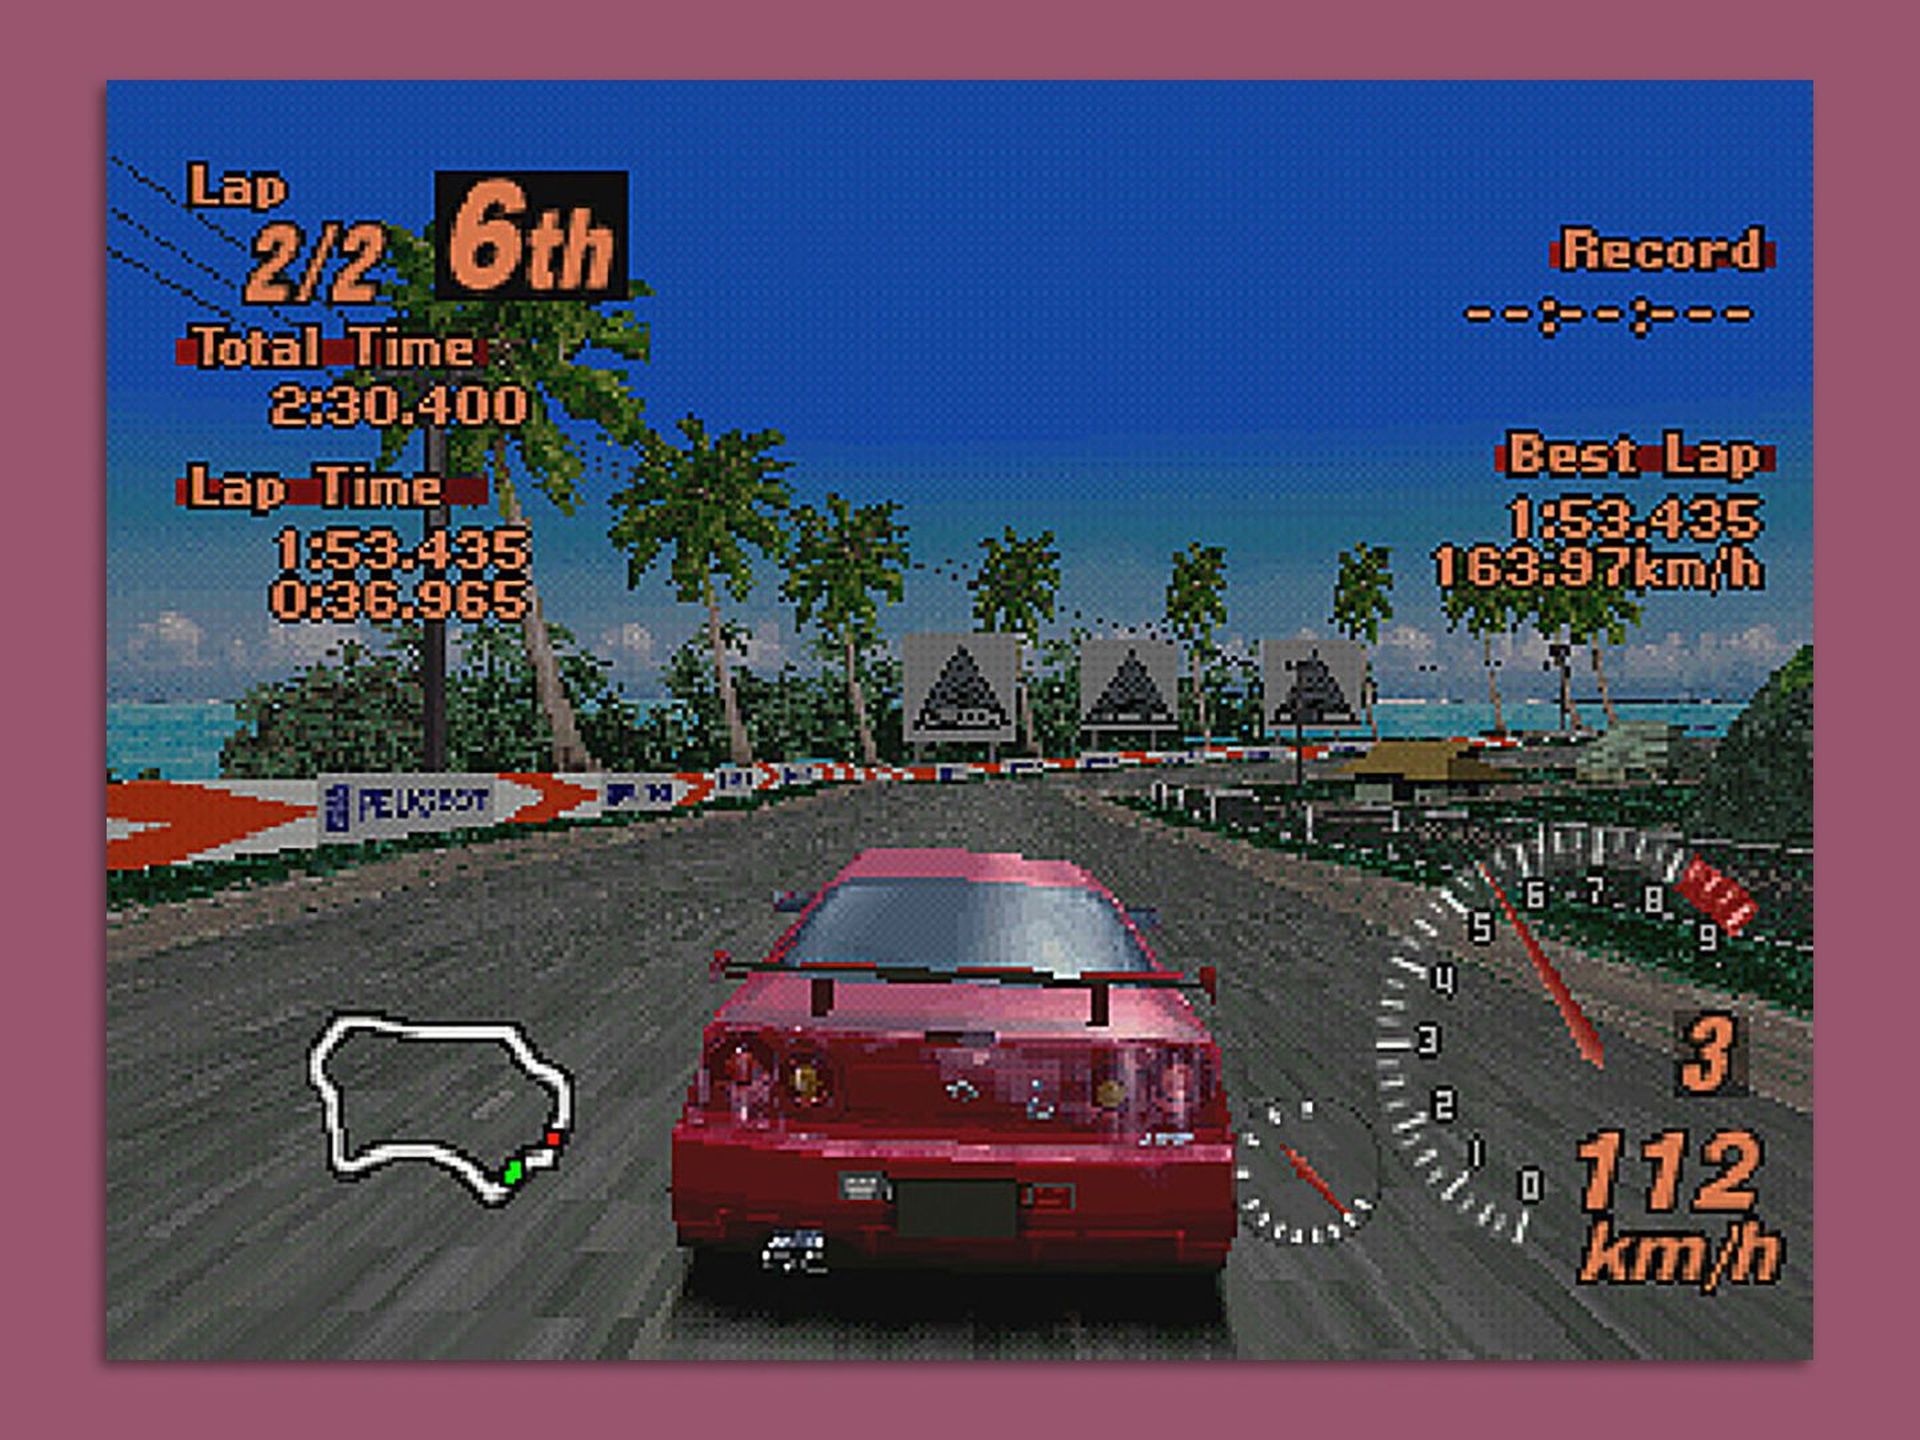 The first time I experienced Gran Turismo on PlayStation